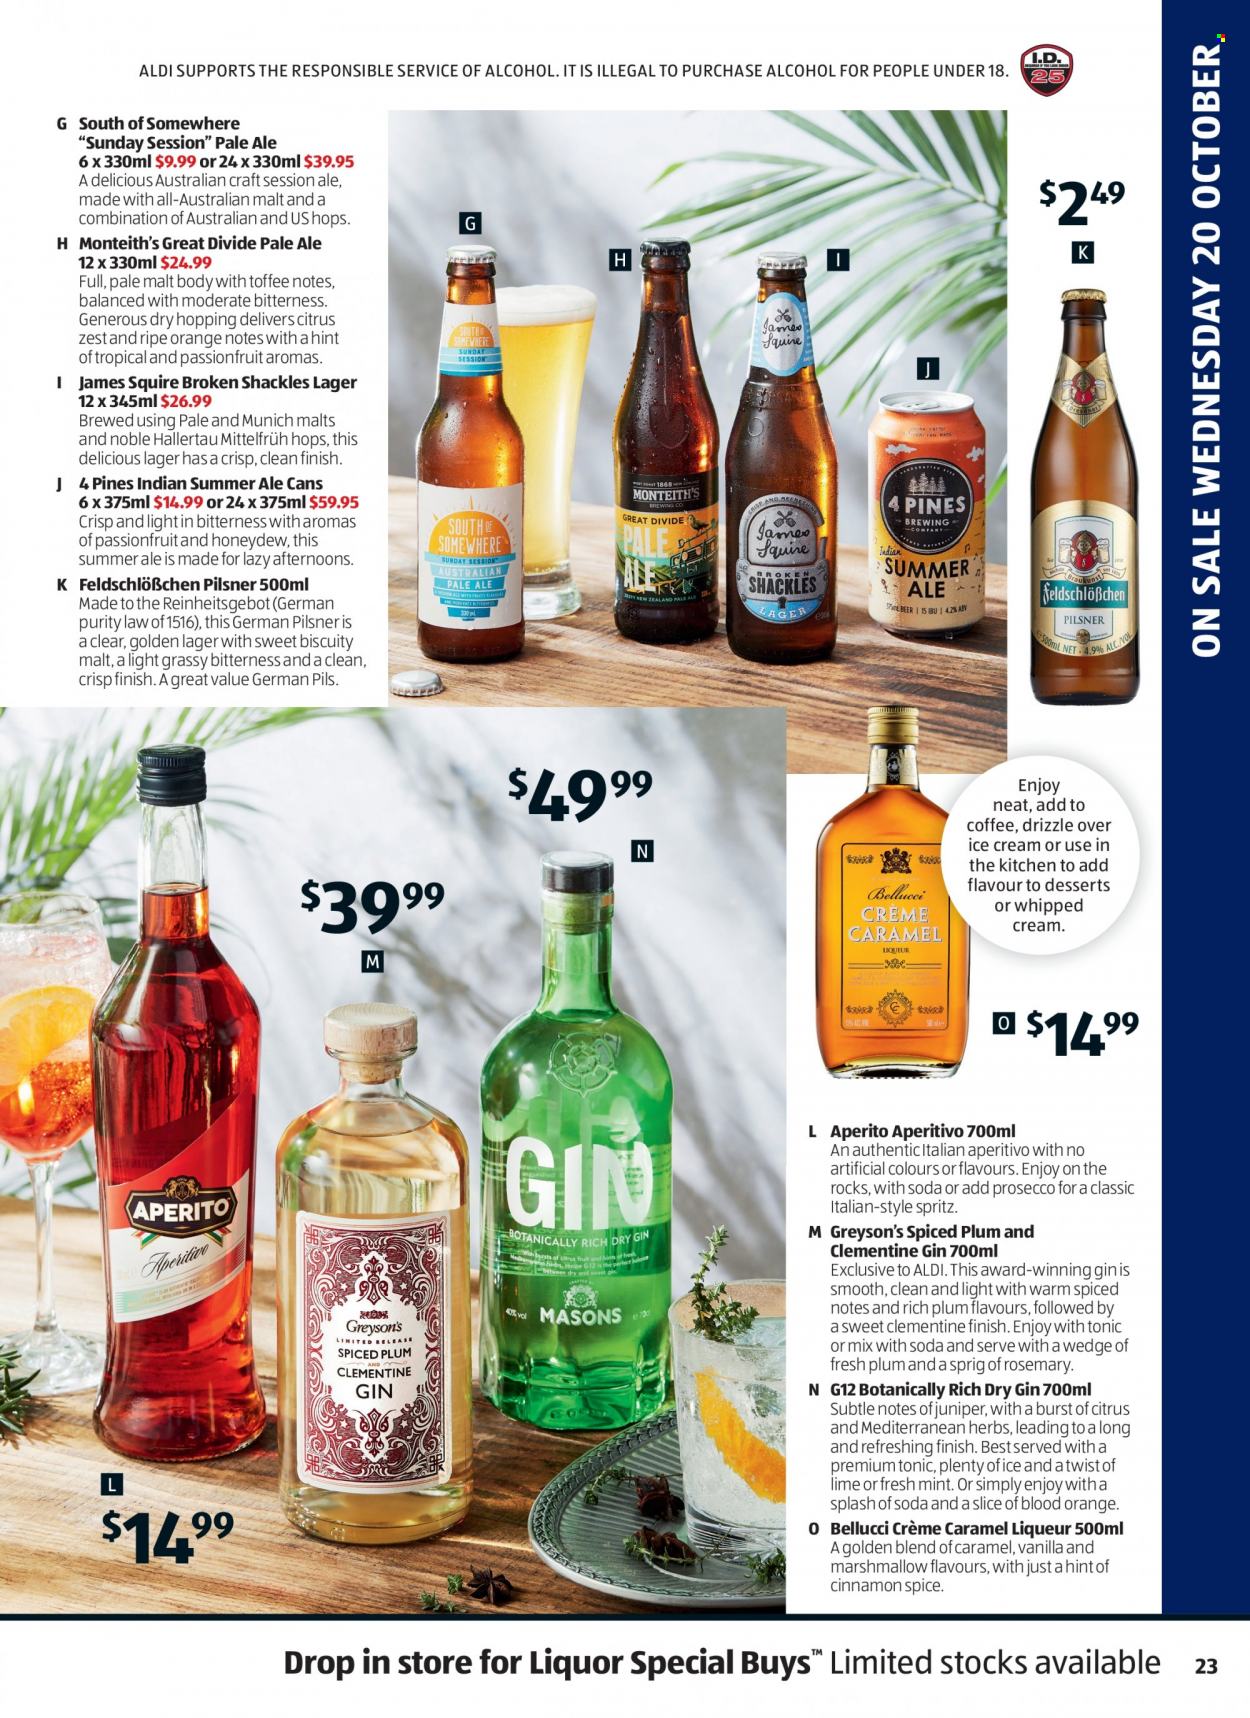 thumbnail - ALDI Catalogue - 20 Oct 2021 - 26 Oct 2021 - Sales products - honeydew, whipped cream, ice cream, toffee, marshmallows, rosemary, spice, herbs, cinnamon, caramel, tonic, coffee, prosecco, gin, liqueur, liquor, beer, Lager, Purity, Plenty. Page 23.